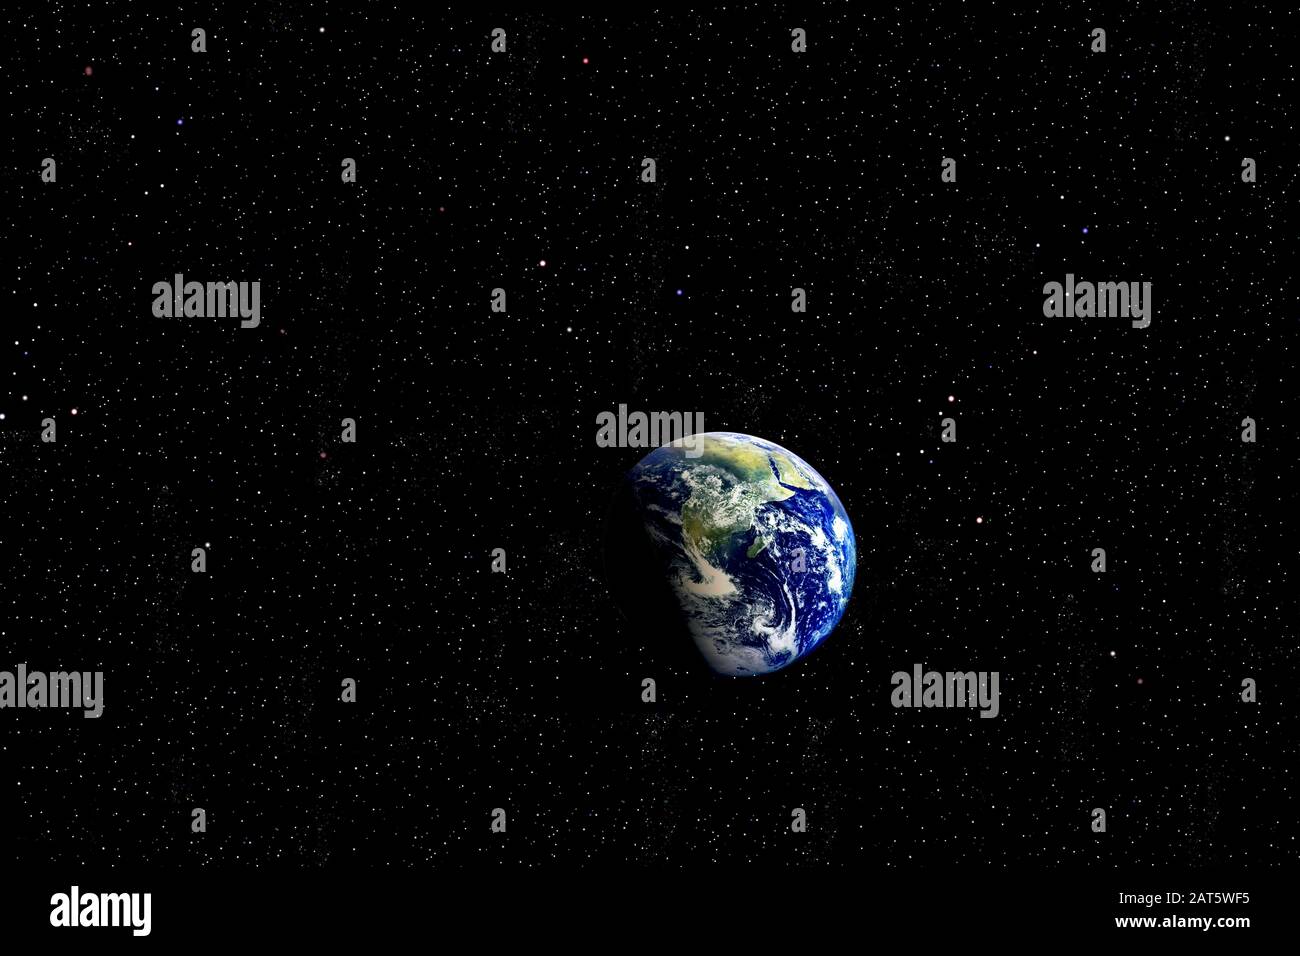 Planet earth viewed against a sea of shining stars Stock Photo